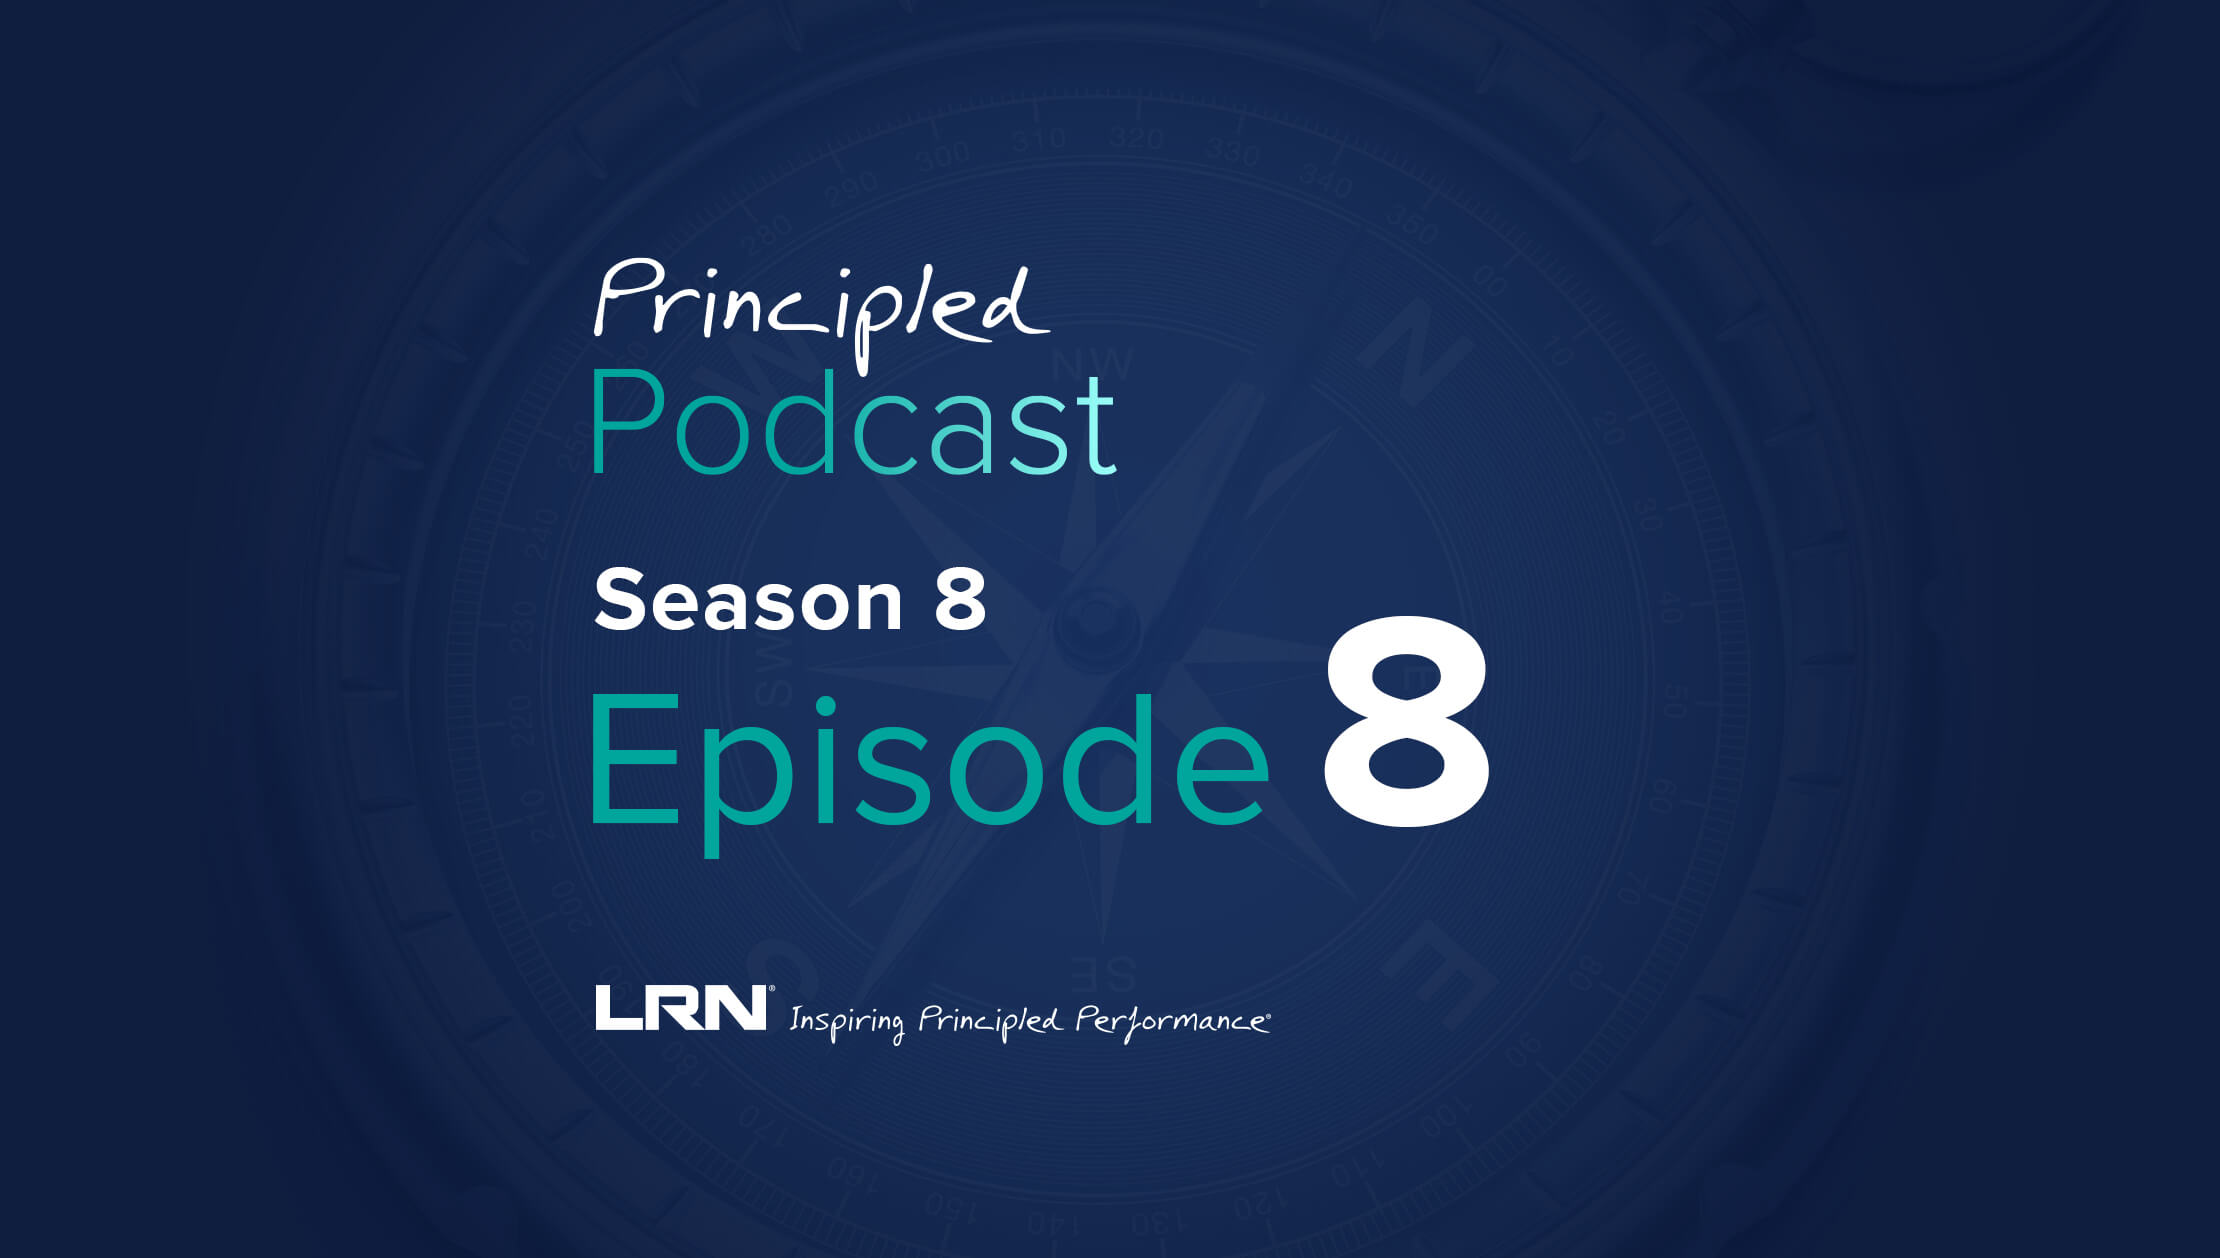 LRN Principled Podcast Season 8 Episode 8 – Compliance benchmarking: Benefits, limitations, and best practices 